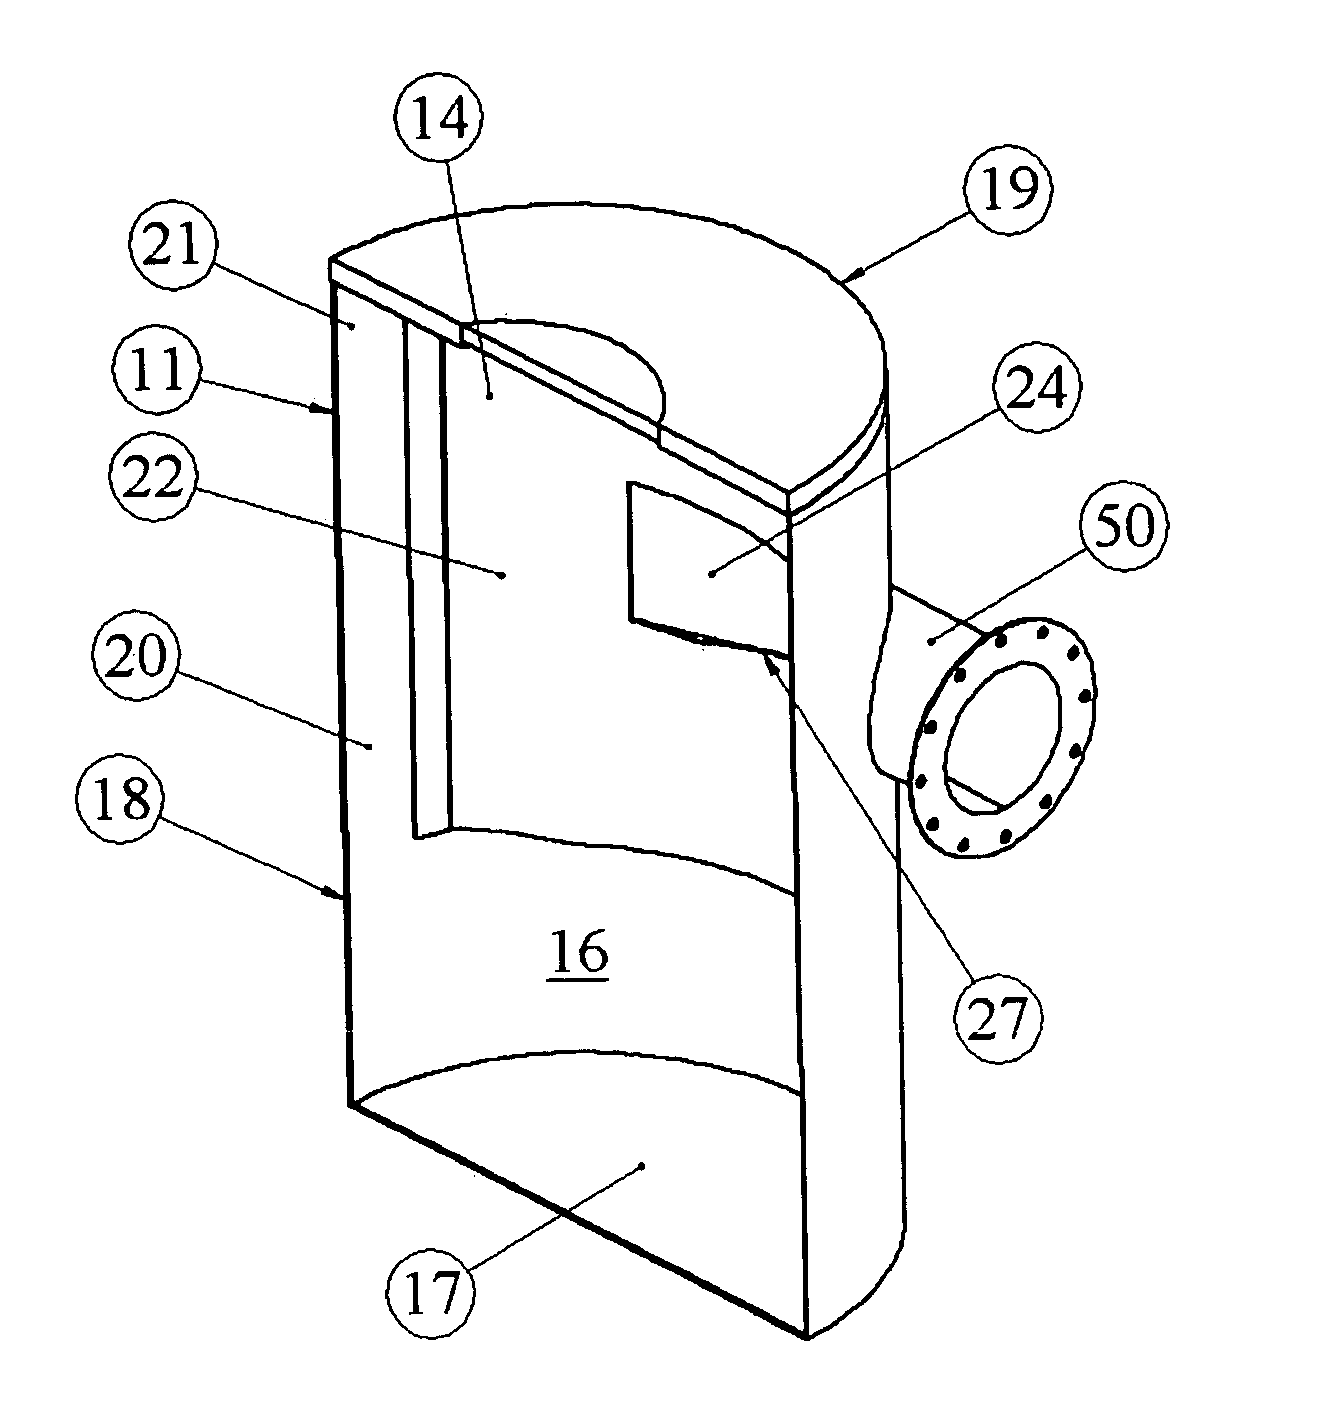 Apparatus for separating floating and non-floating particulate from a fluid stream